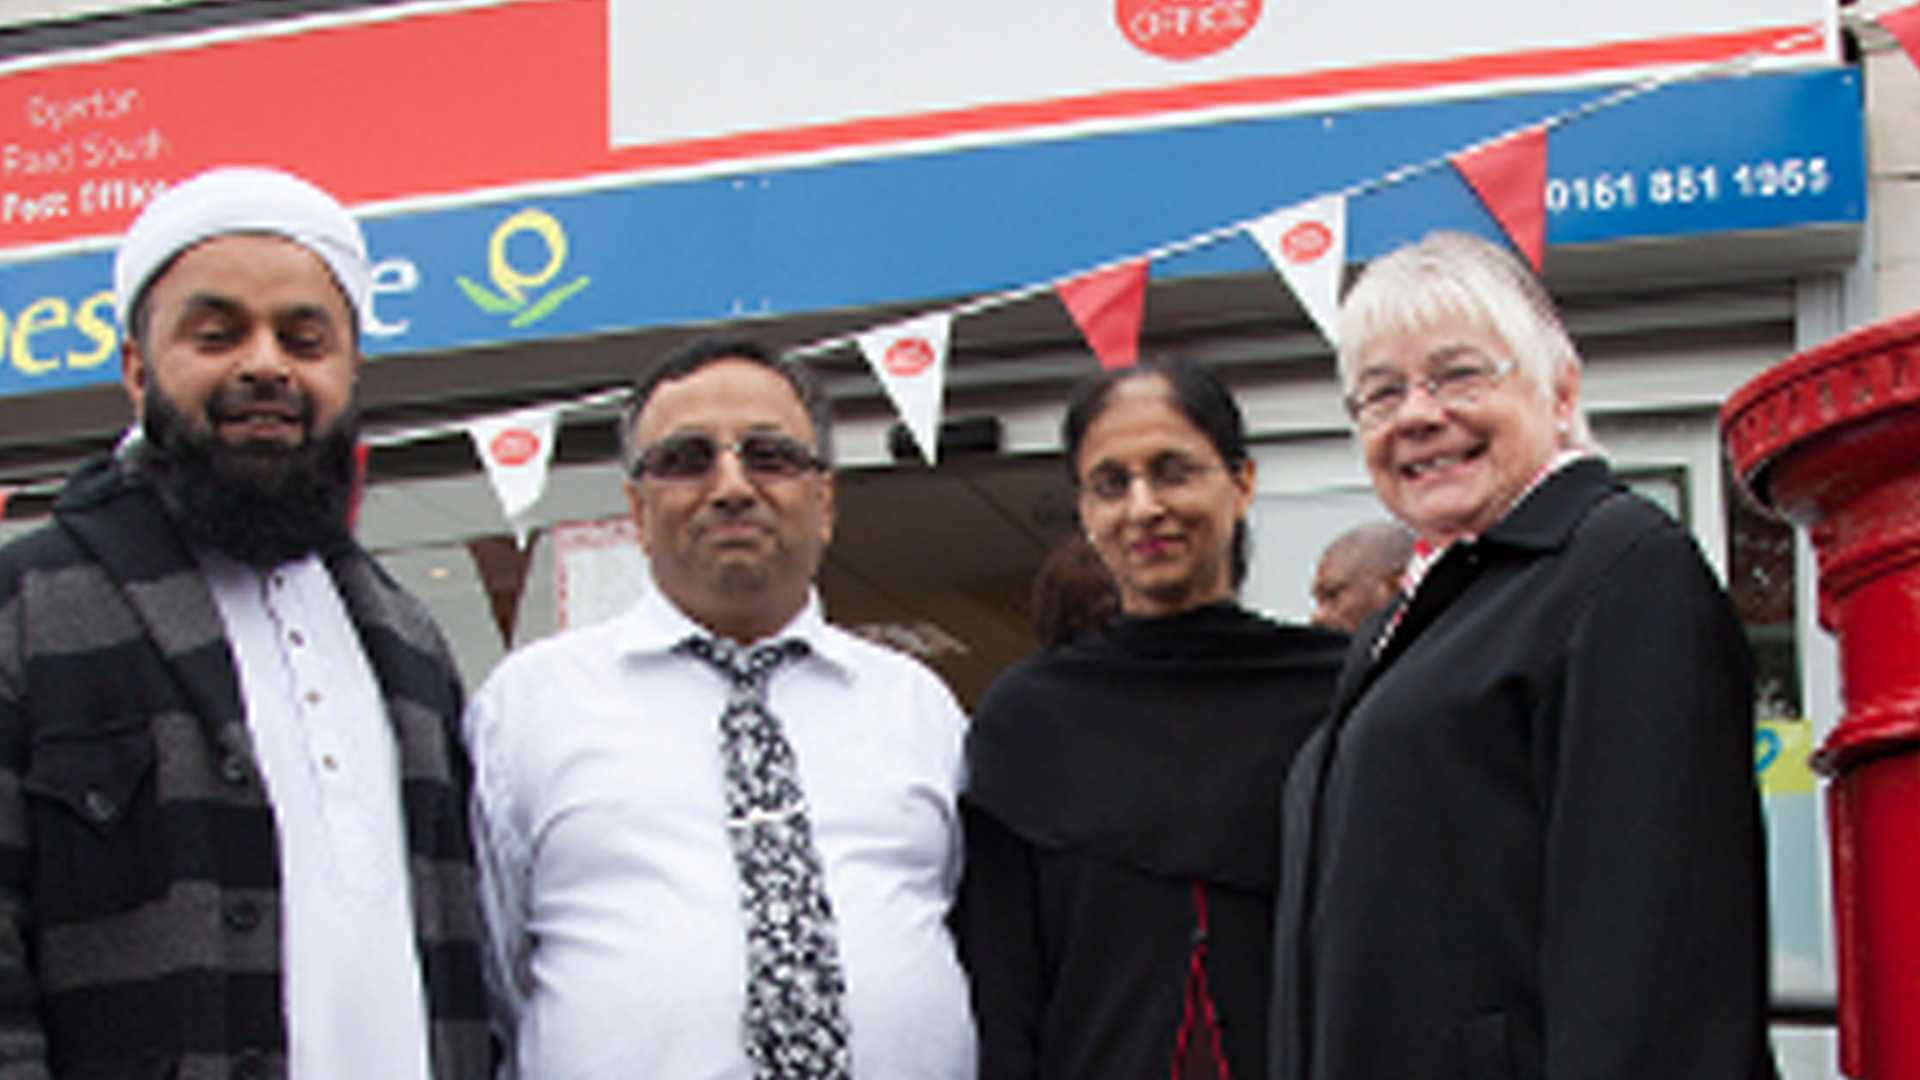 Whalley Range Labour - Aftab Razaq and Mary Watson at Egerton Road South Post Office Whalley Range